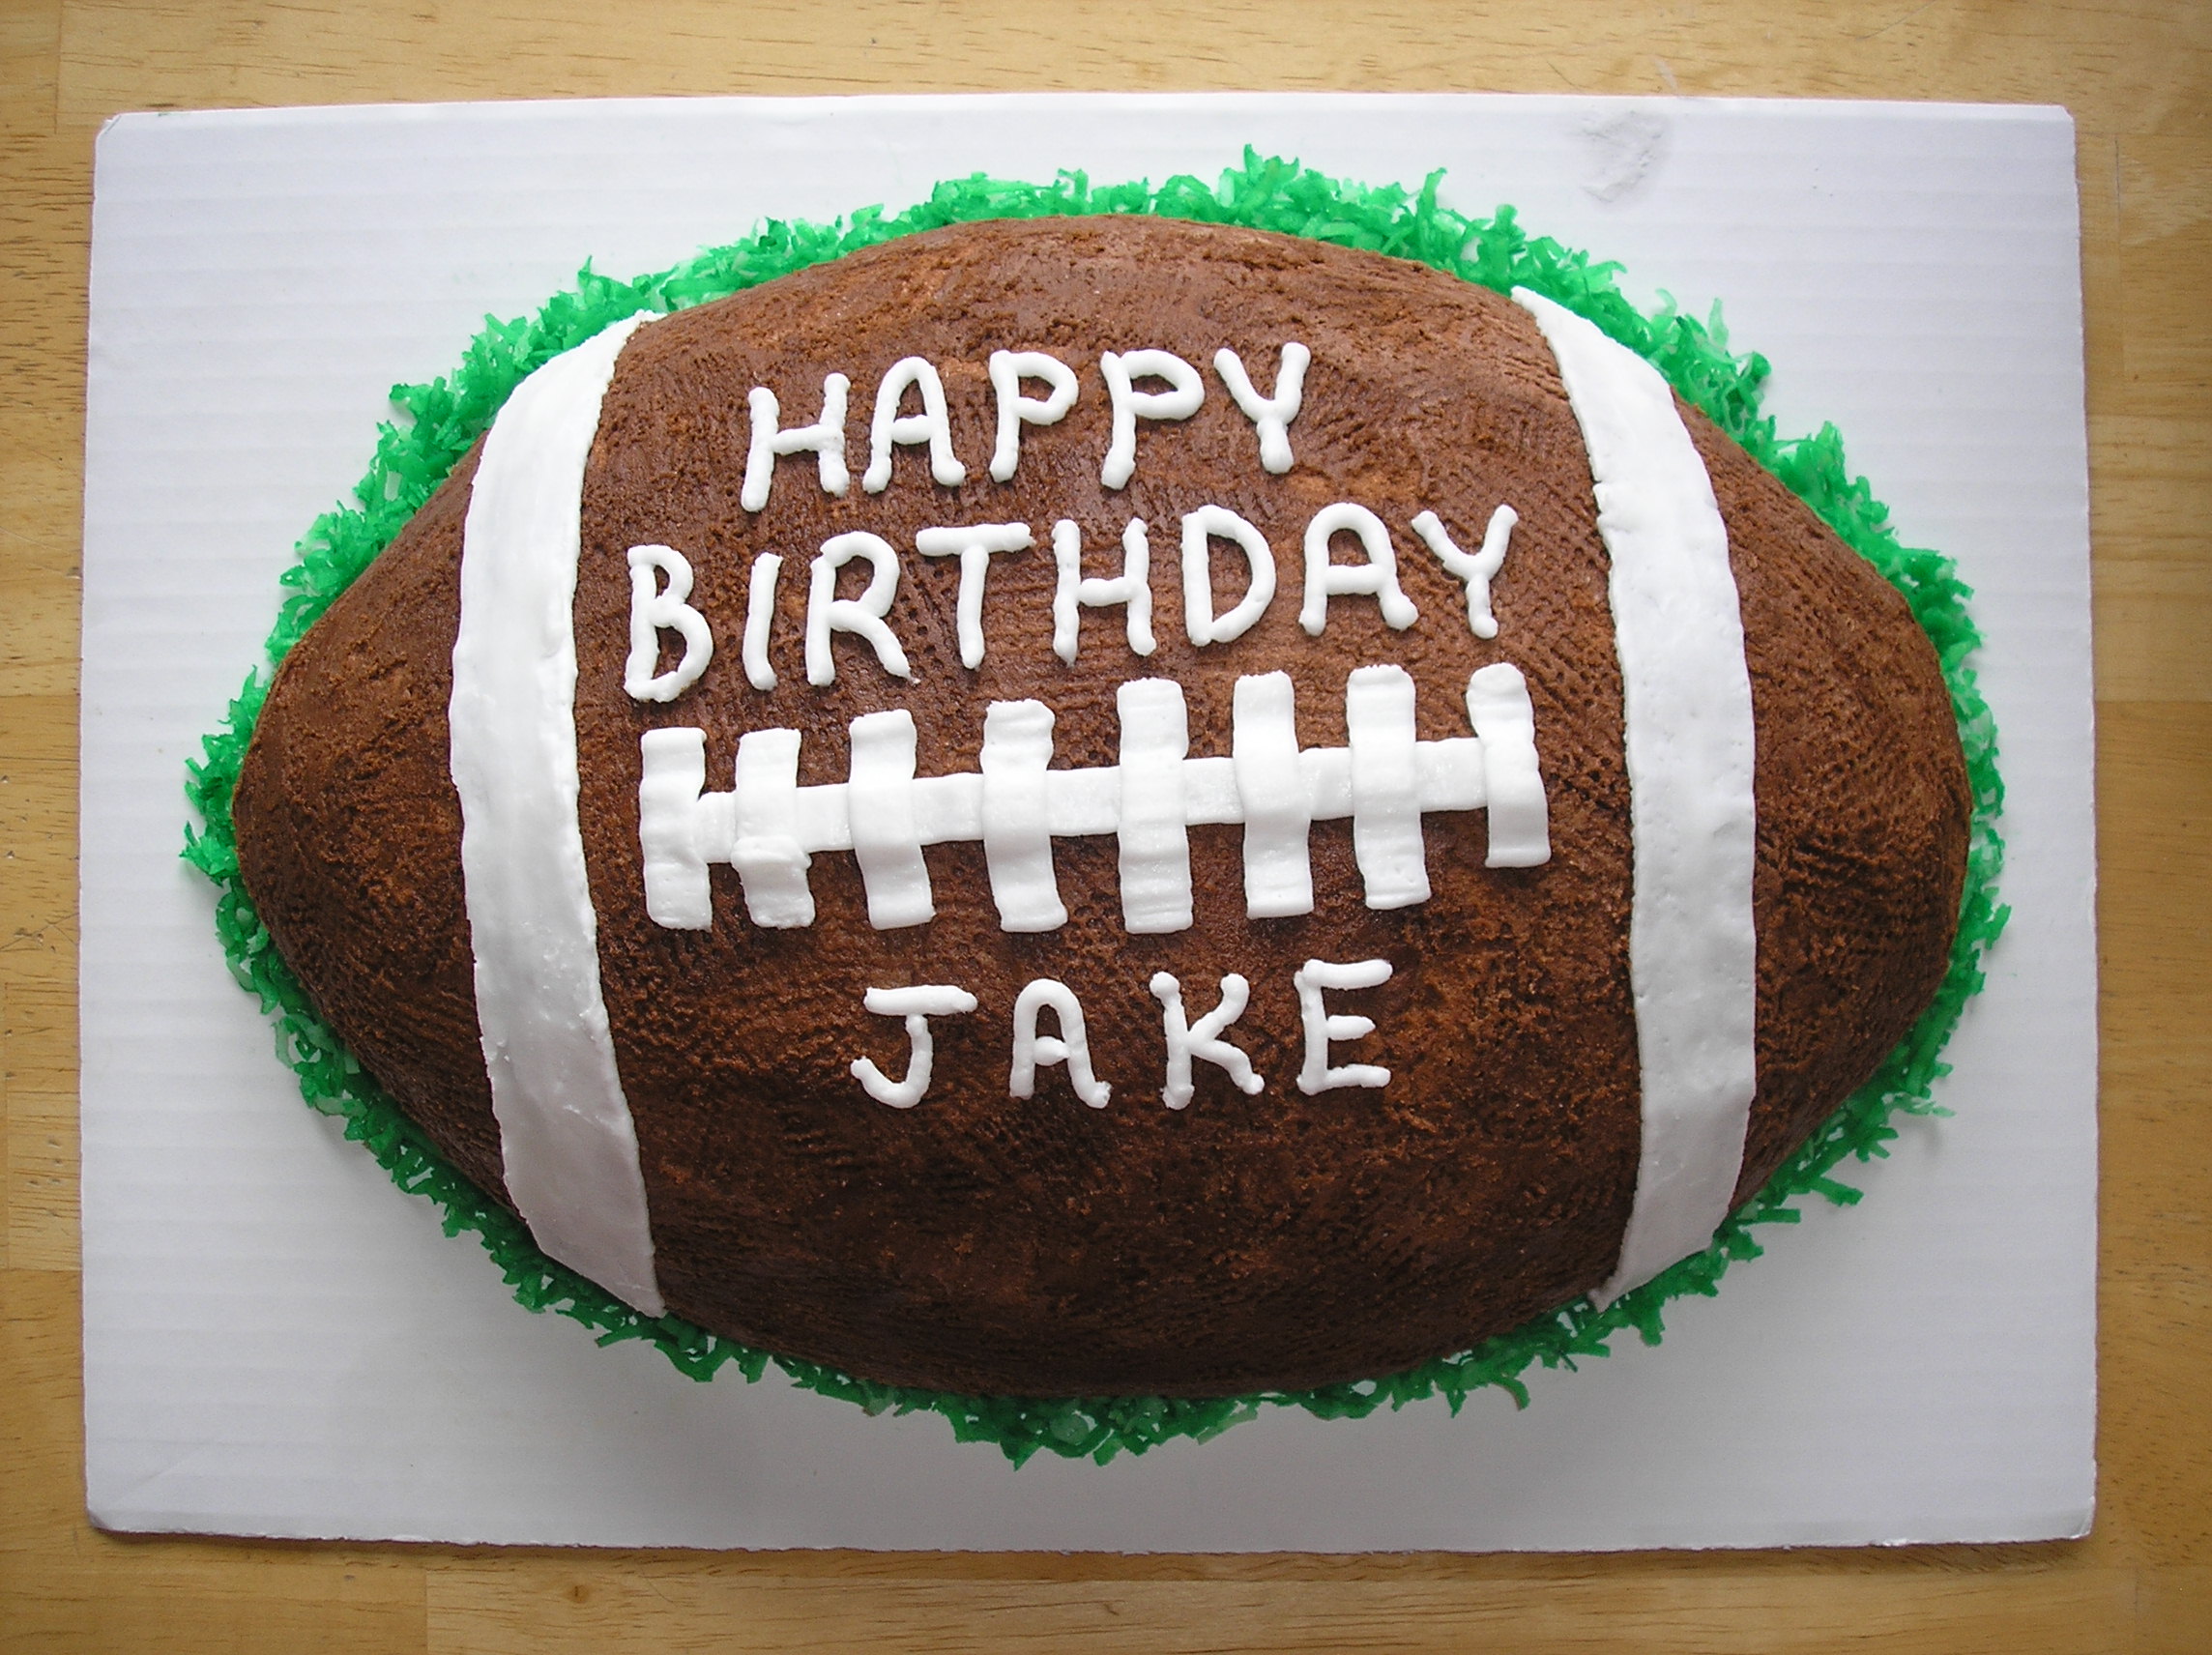 Pin Happy Birthday Jake Cake Carries Confections Cake on. 